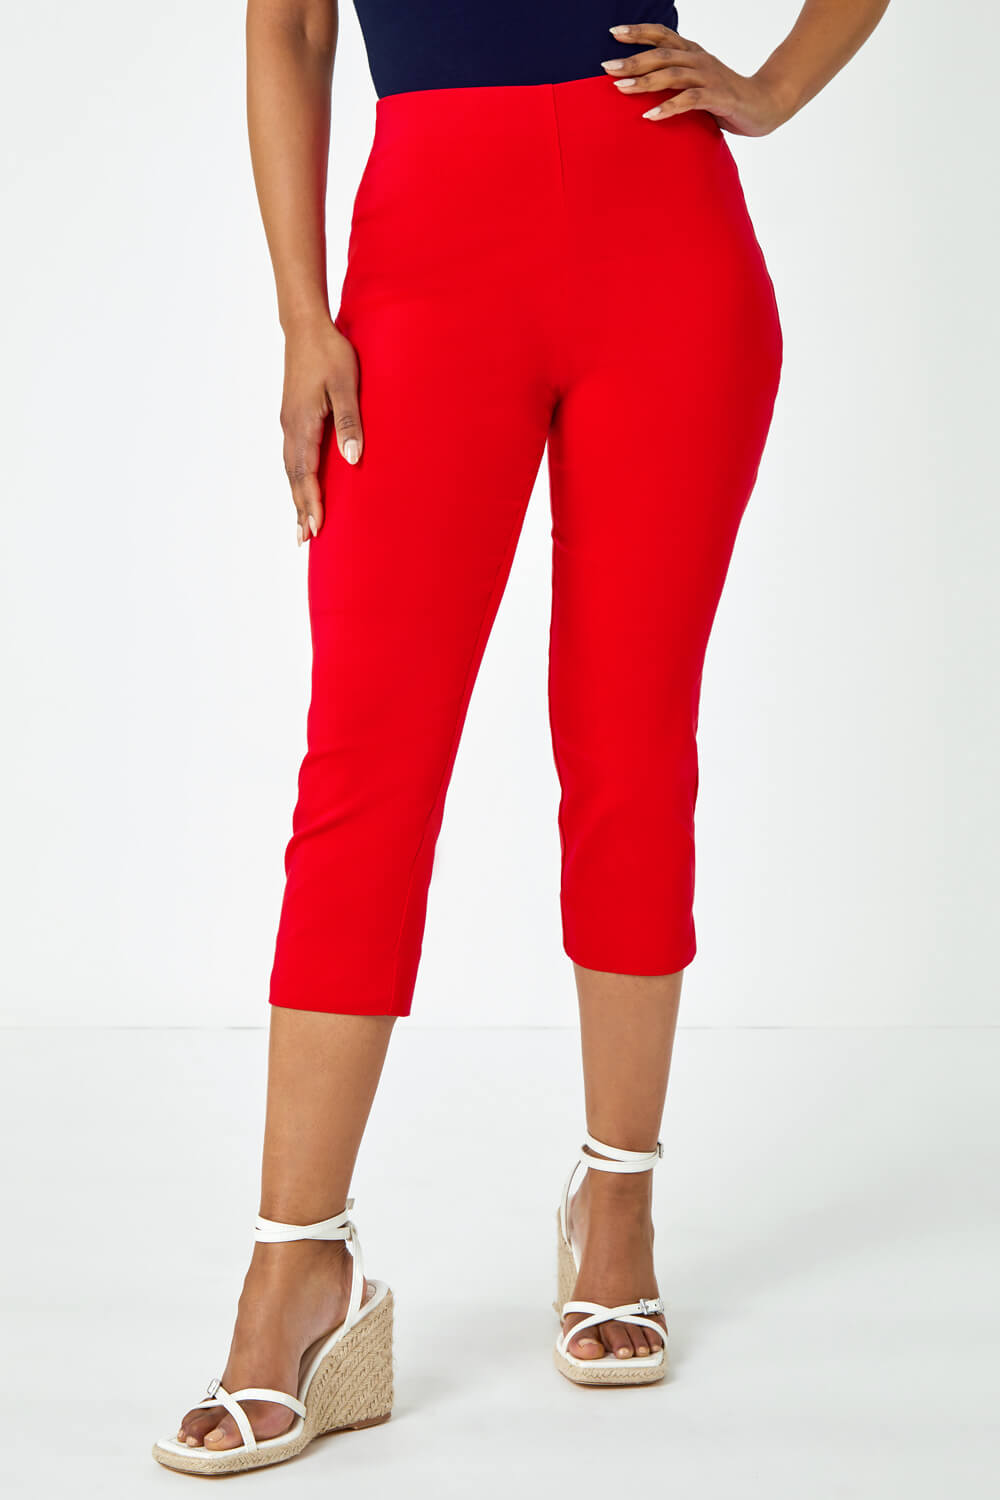 Red Petite Cropped Stretch Trouser, Image 2 of 5